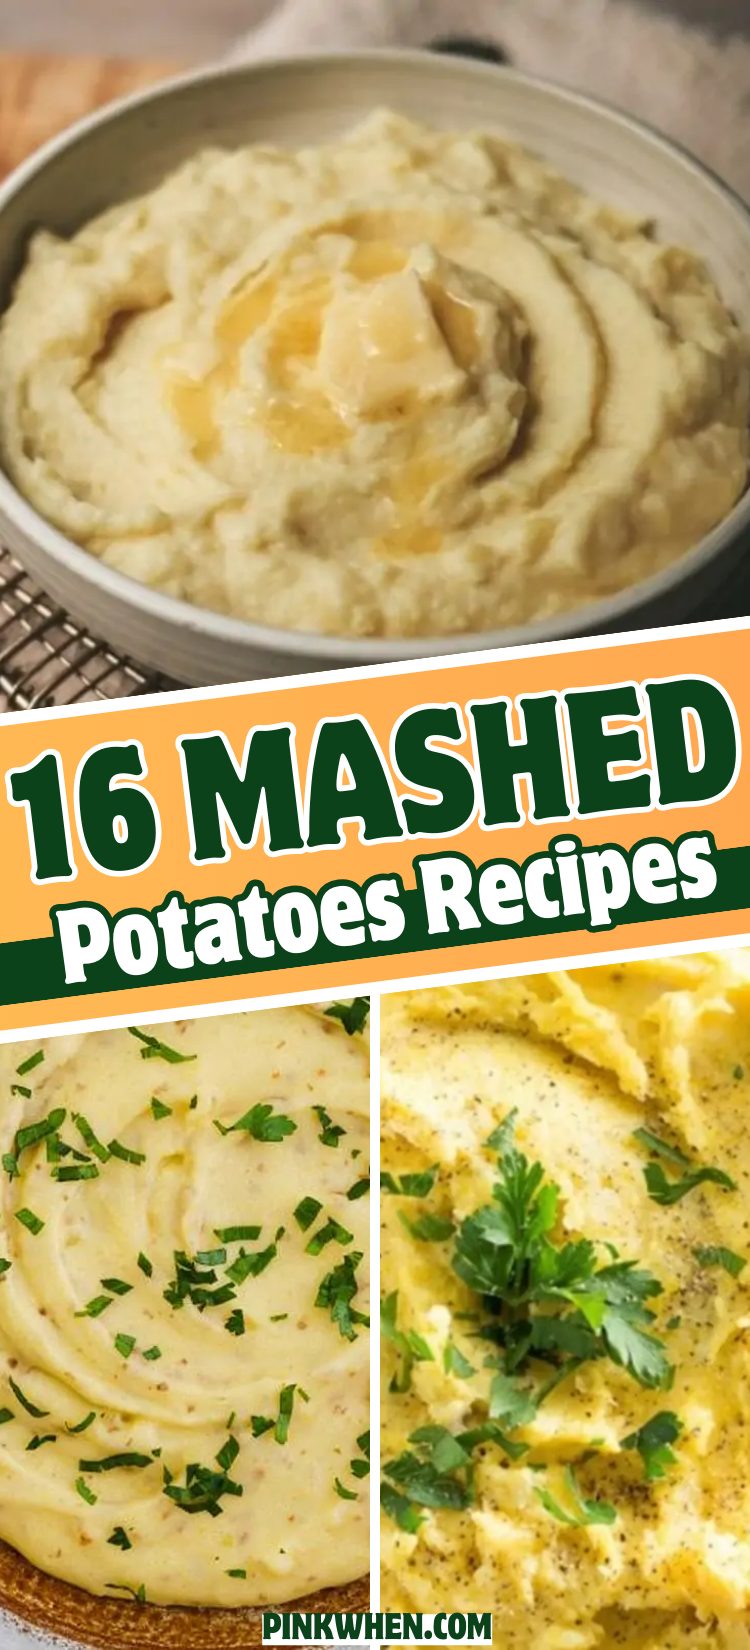 20 Mashed Potatoes Recipes that Melt in the Mouth